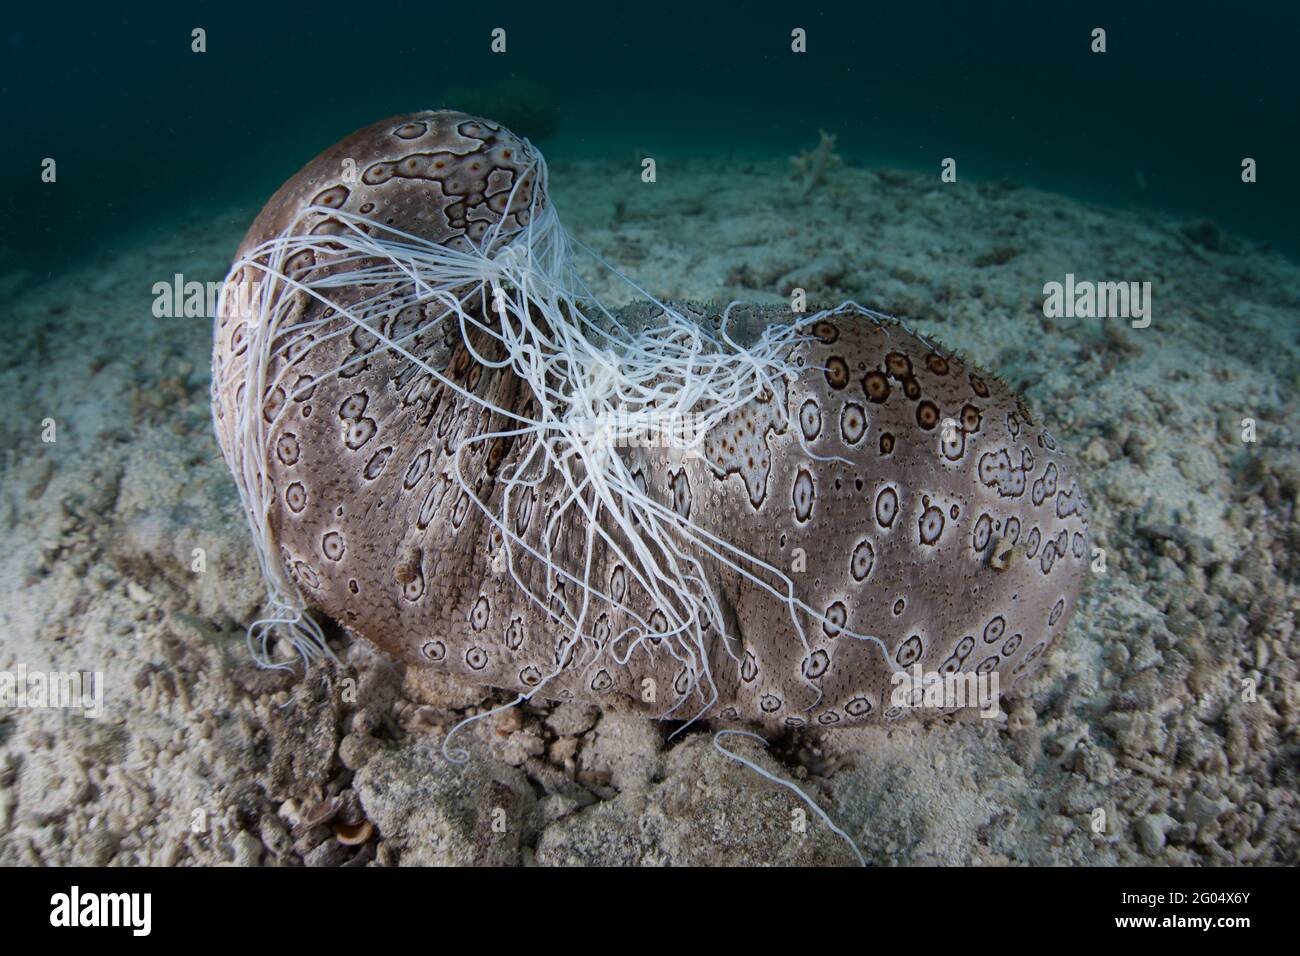 A large sea cucumber, Bohadschia argus, is found on the seafloor in Palau. This echinoderm can eject sticky, toxic tubules to deter predators. Stock Photo